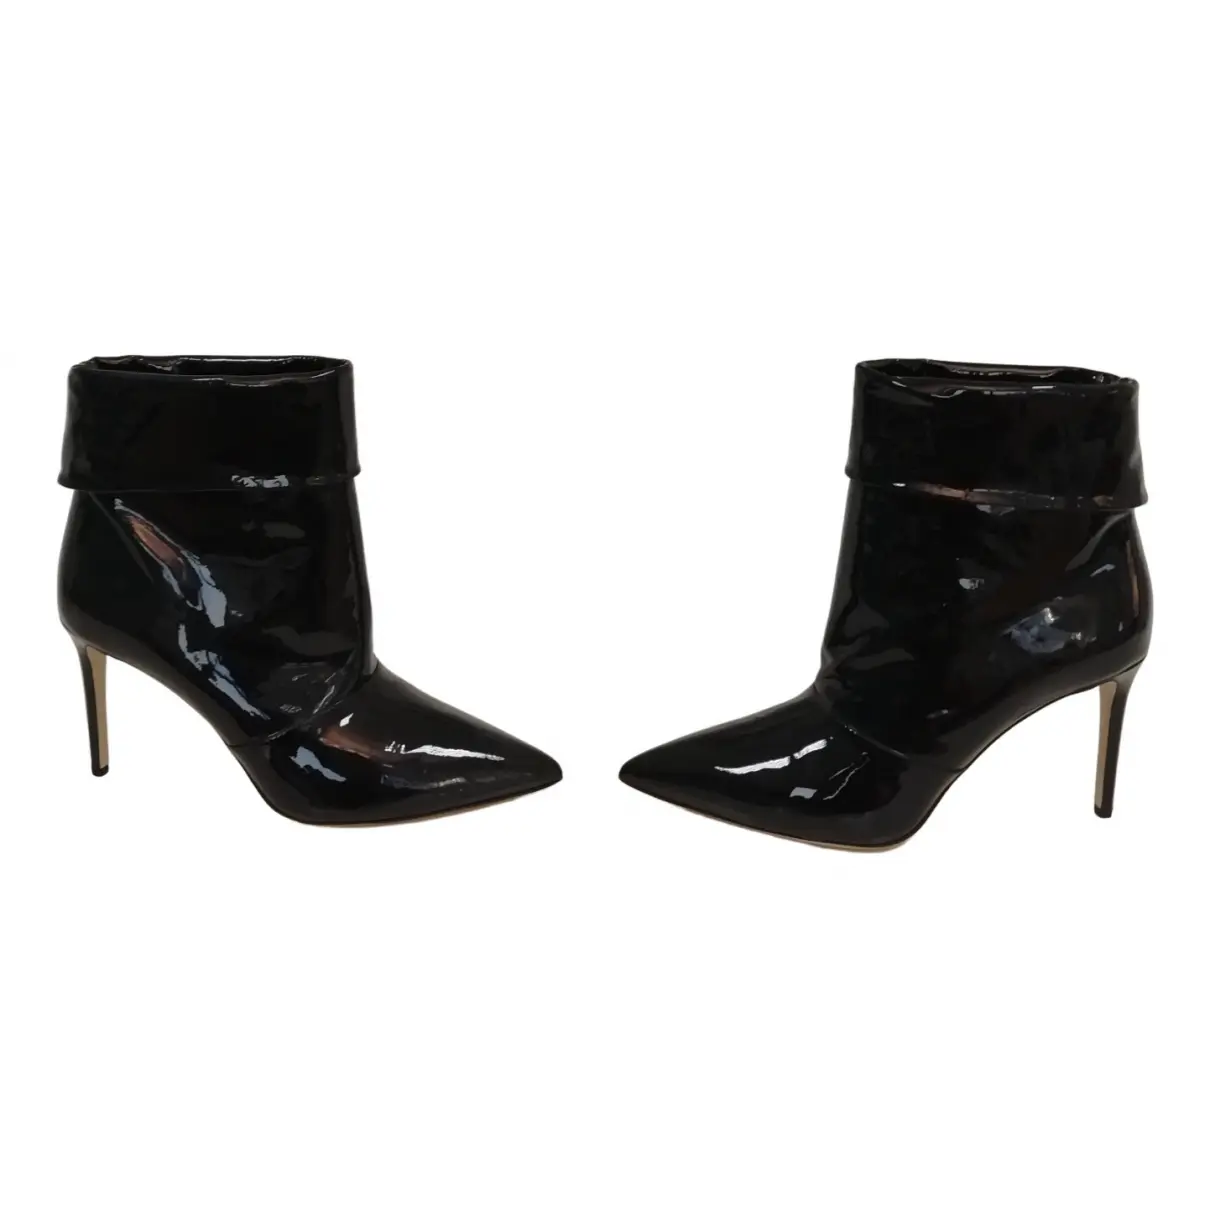 Patent leather ankle boots Paul Andrew